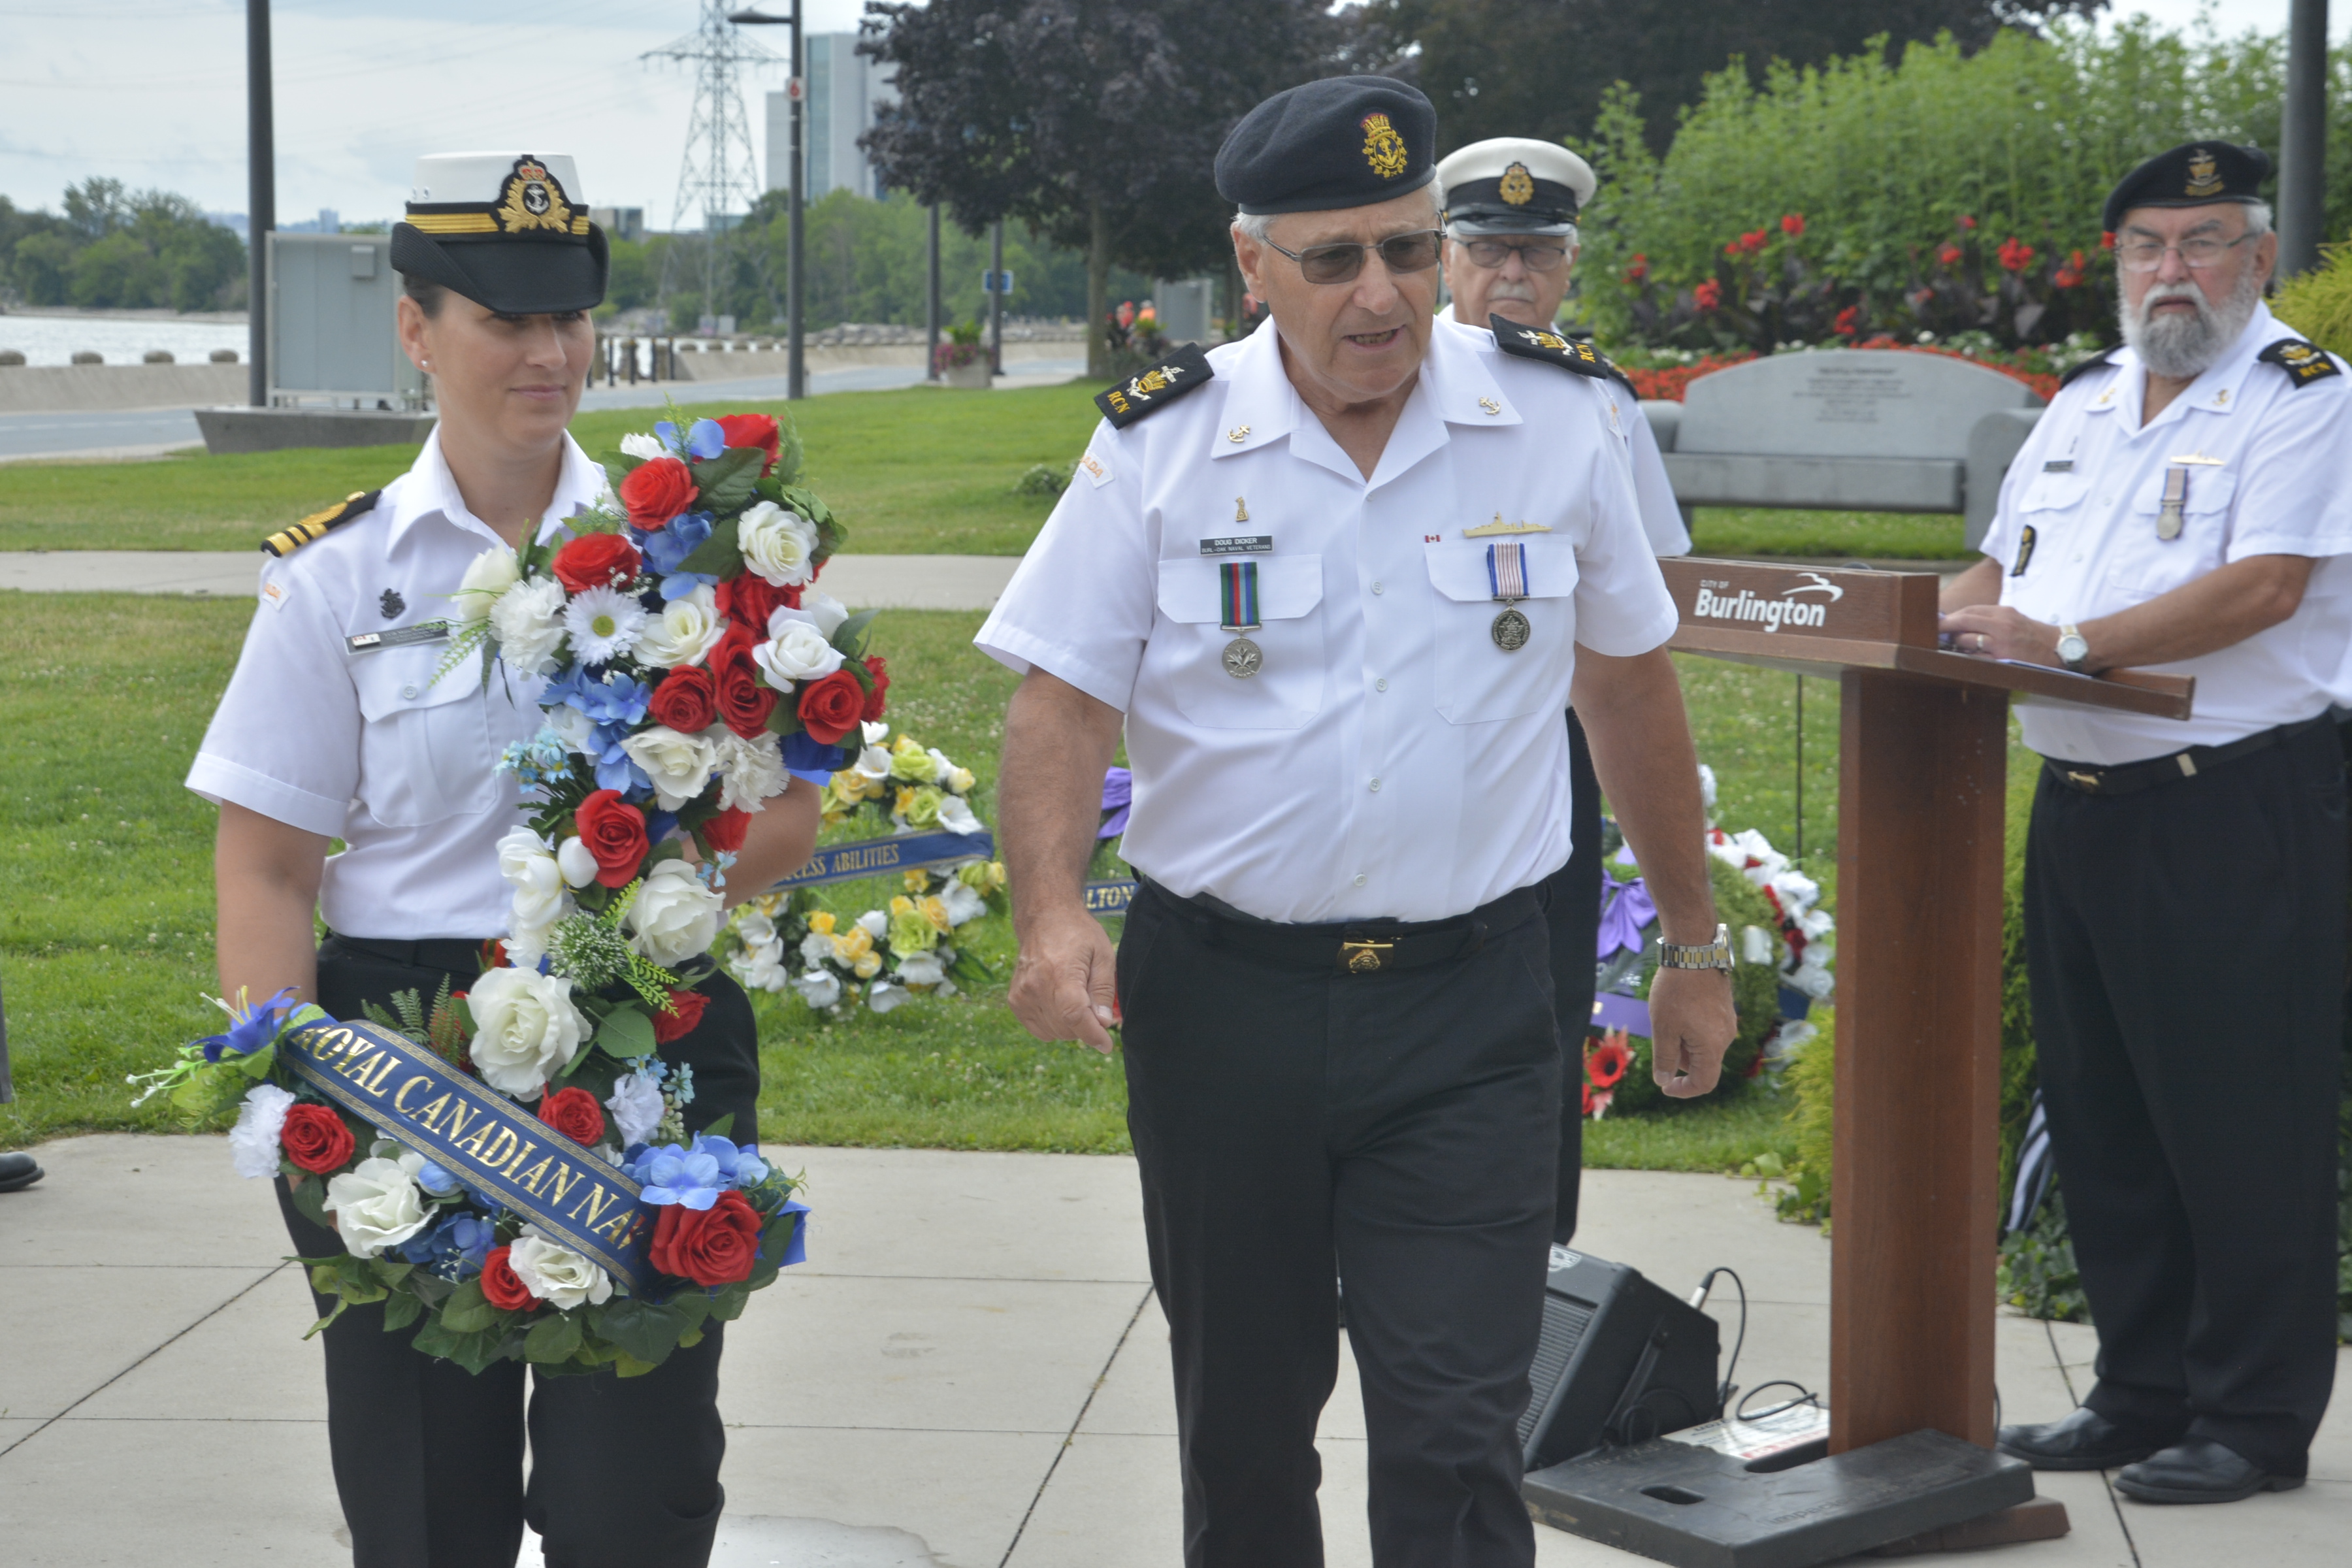 LCdr Sowa lays wreath for the RCN